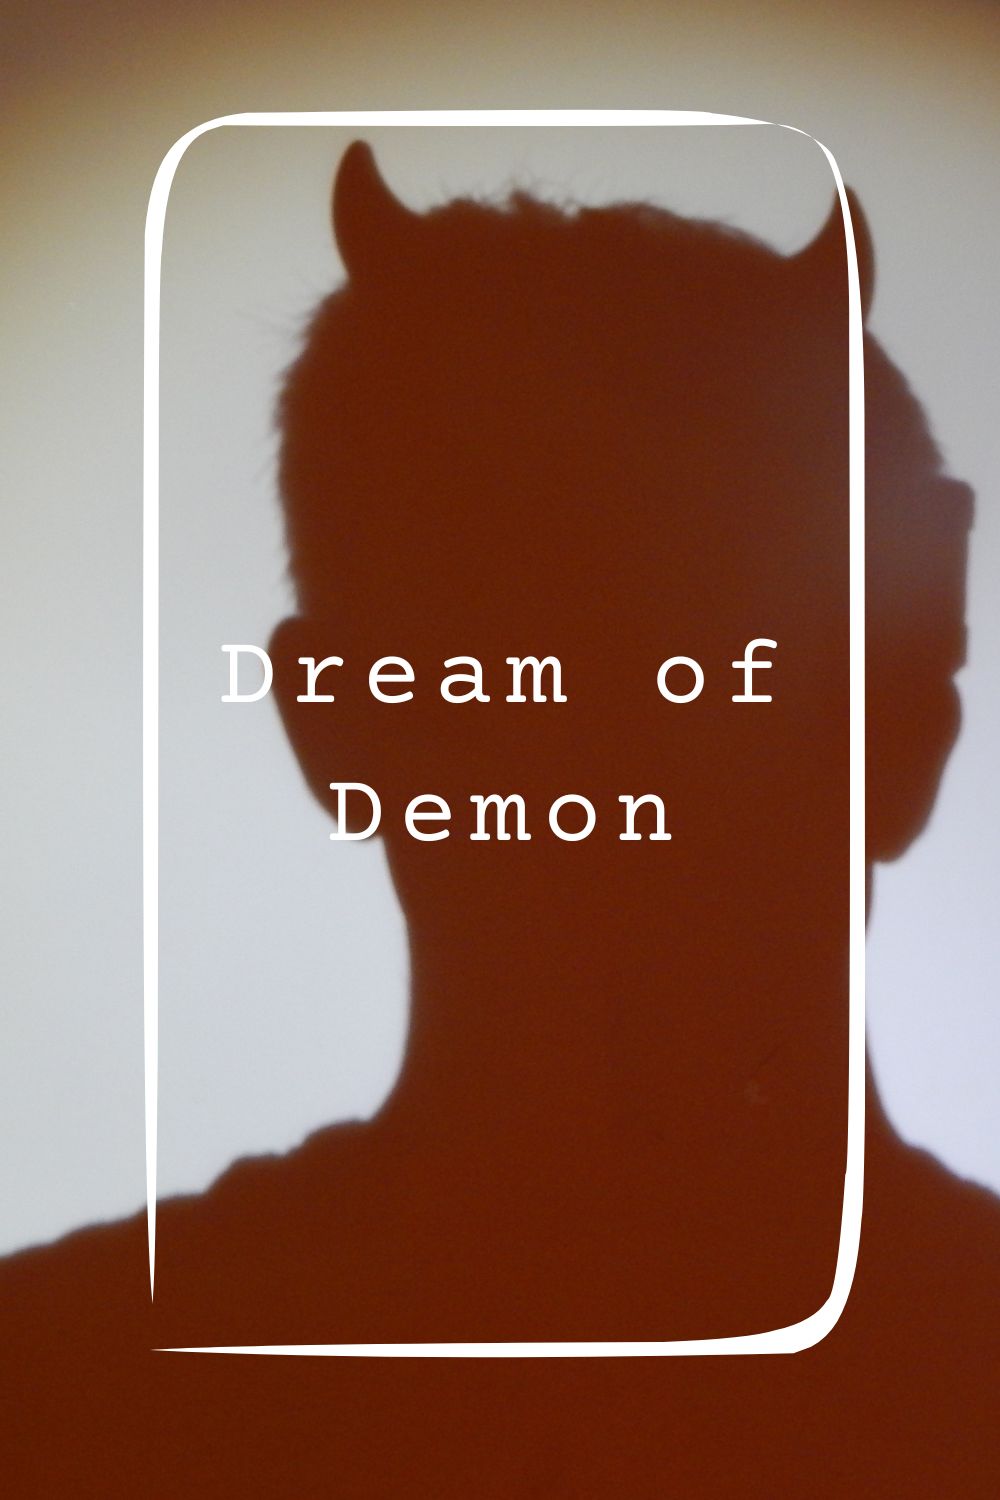 11 Dream of Demon Meanings4